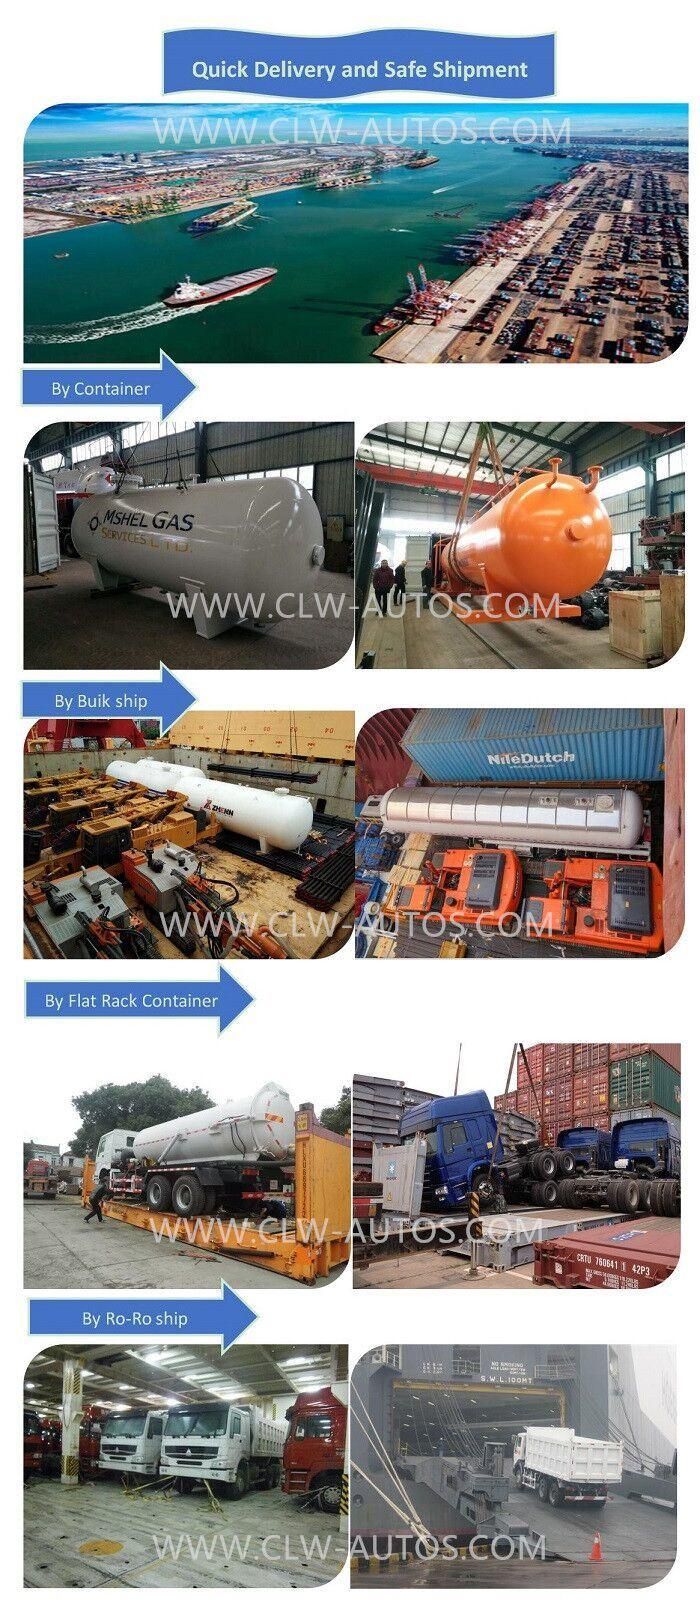 China Dongfeng 10cbm/10000liters Small Hook Arm Waste Truck Arm Lifting Garbage Truck From Factory Sale Directly